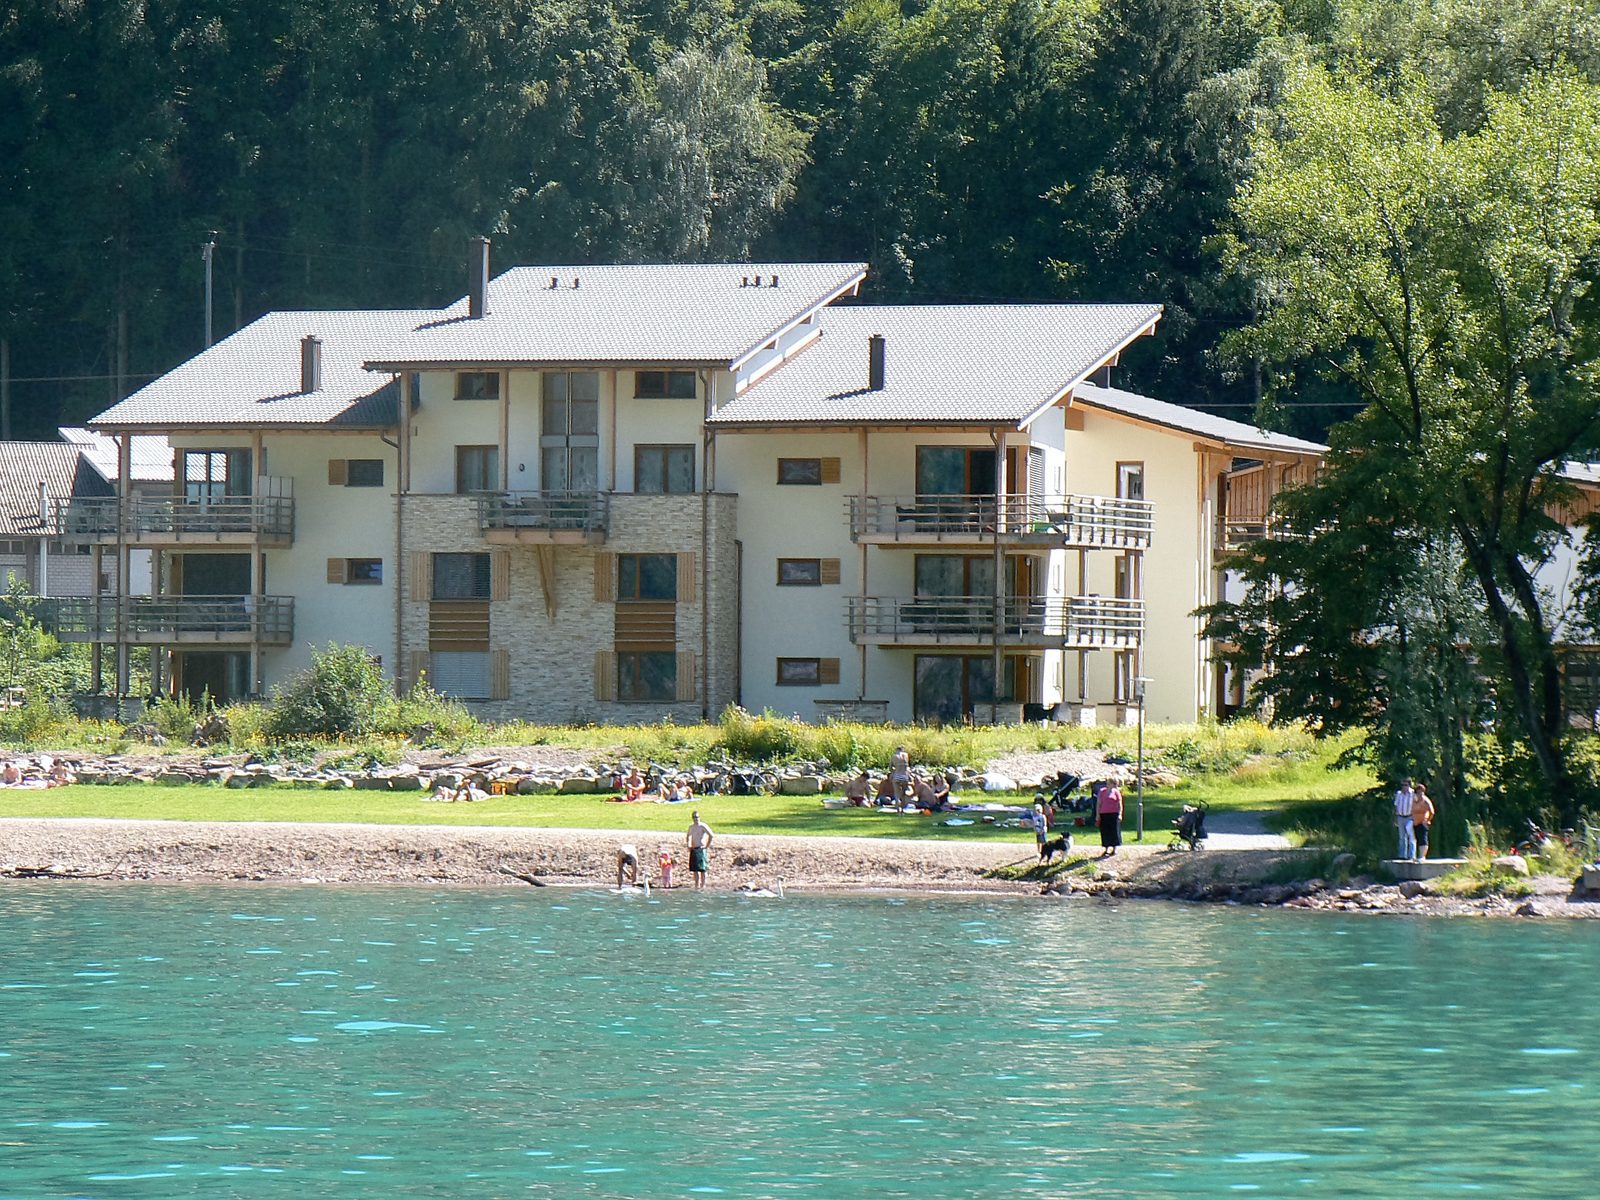 Sun, beach and water sports during the summer vacation, directly from the holiday homes of Walensee Apartments on Resort Walensee Heidiland Flumserberg Switzerland